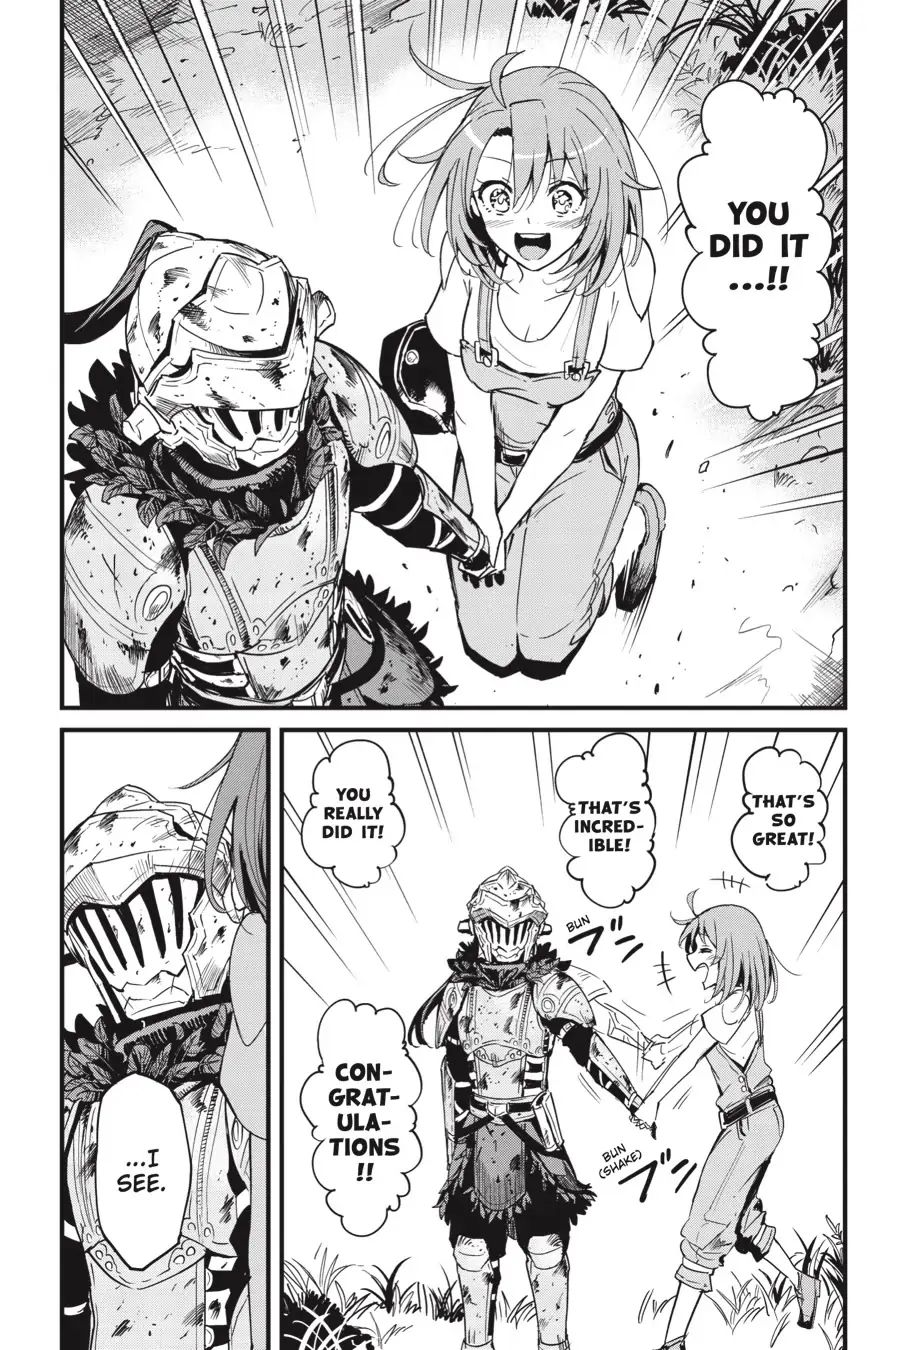 Goblin Slayer: Side Story Year One chapter 78